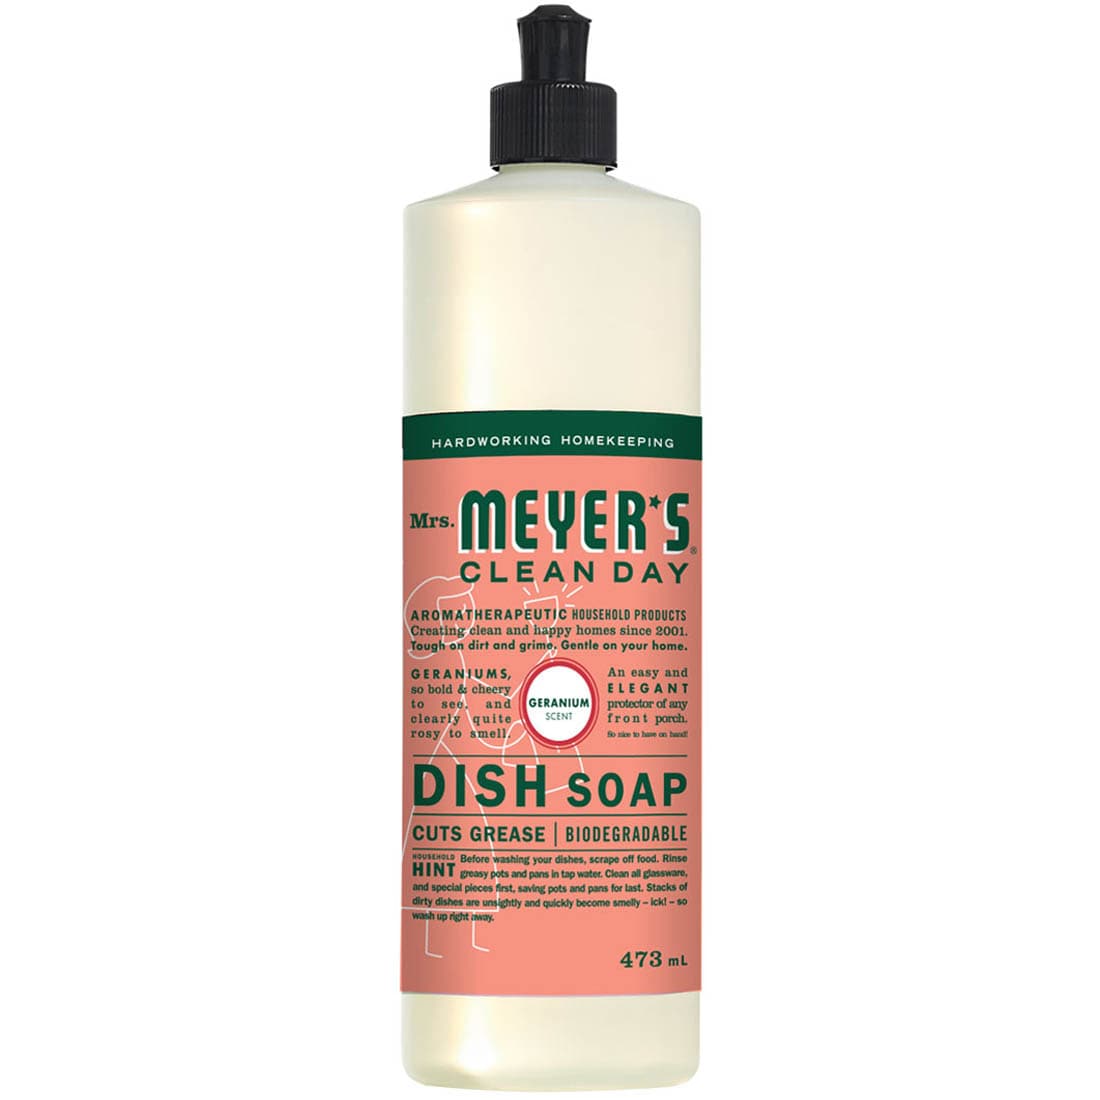 Mrs. Meyer's Clean Day Dish Soap, 437mL